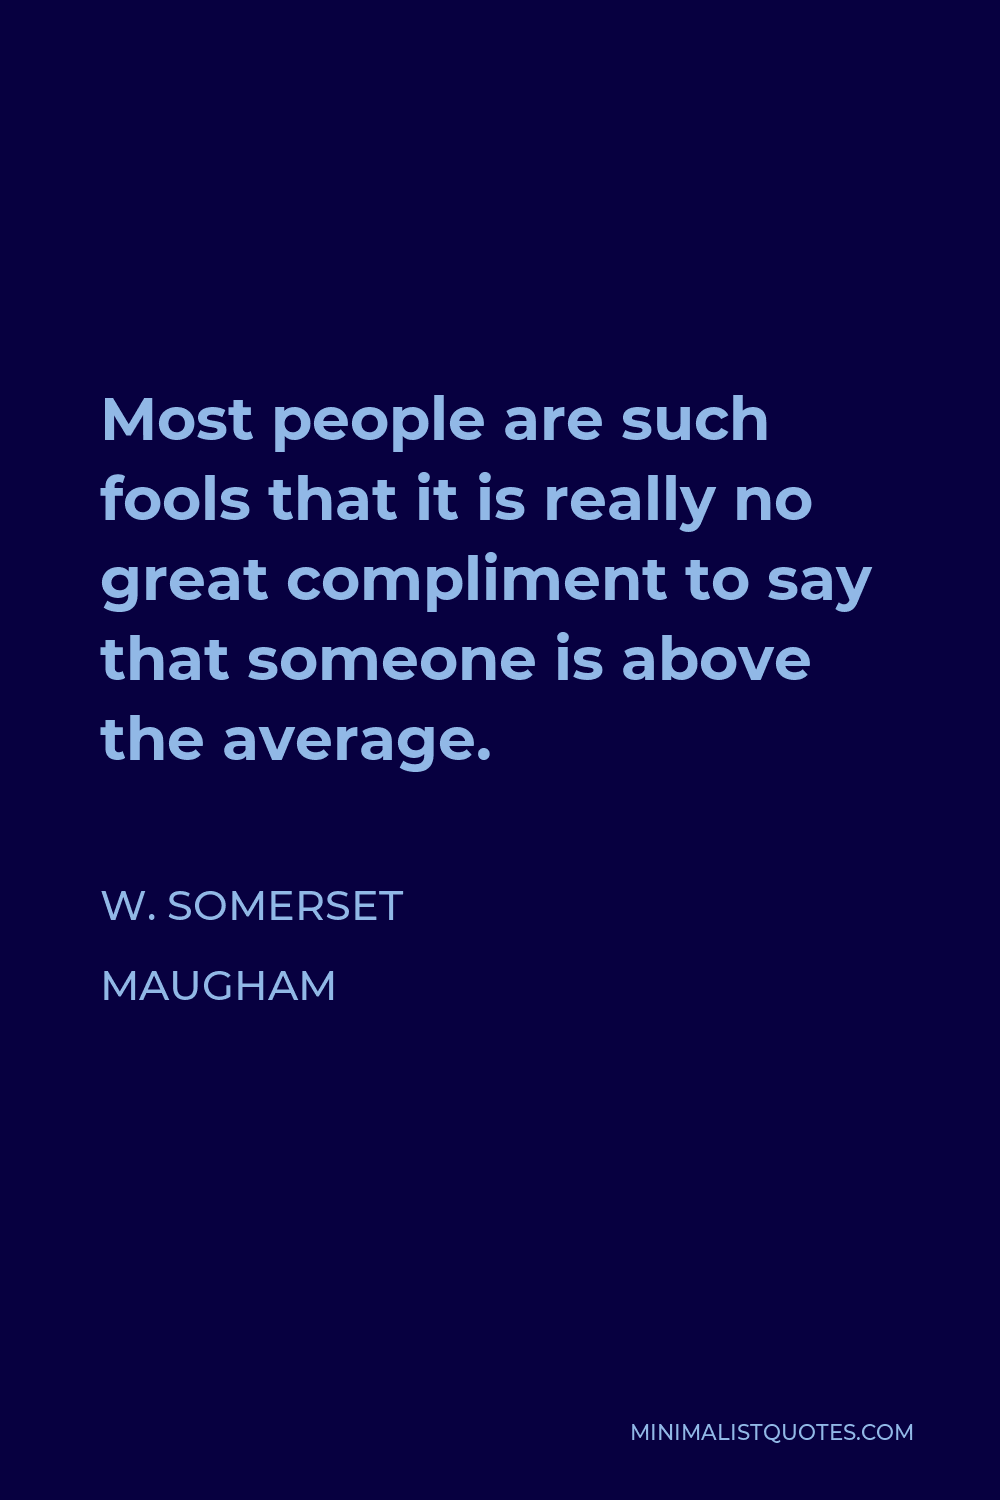 W. Somerset Maugham Quote - Most people are such fools that it is really no great compliment to say that someone is above the average.